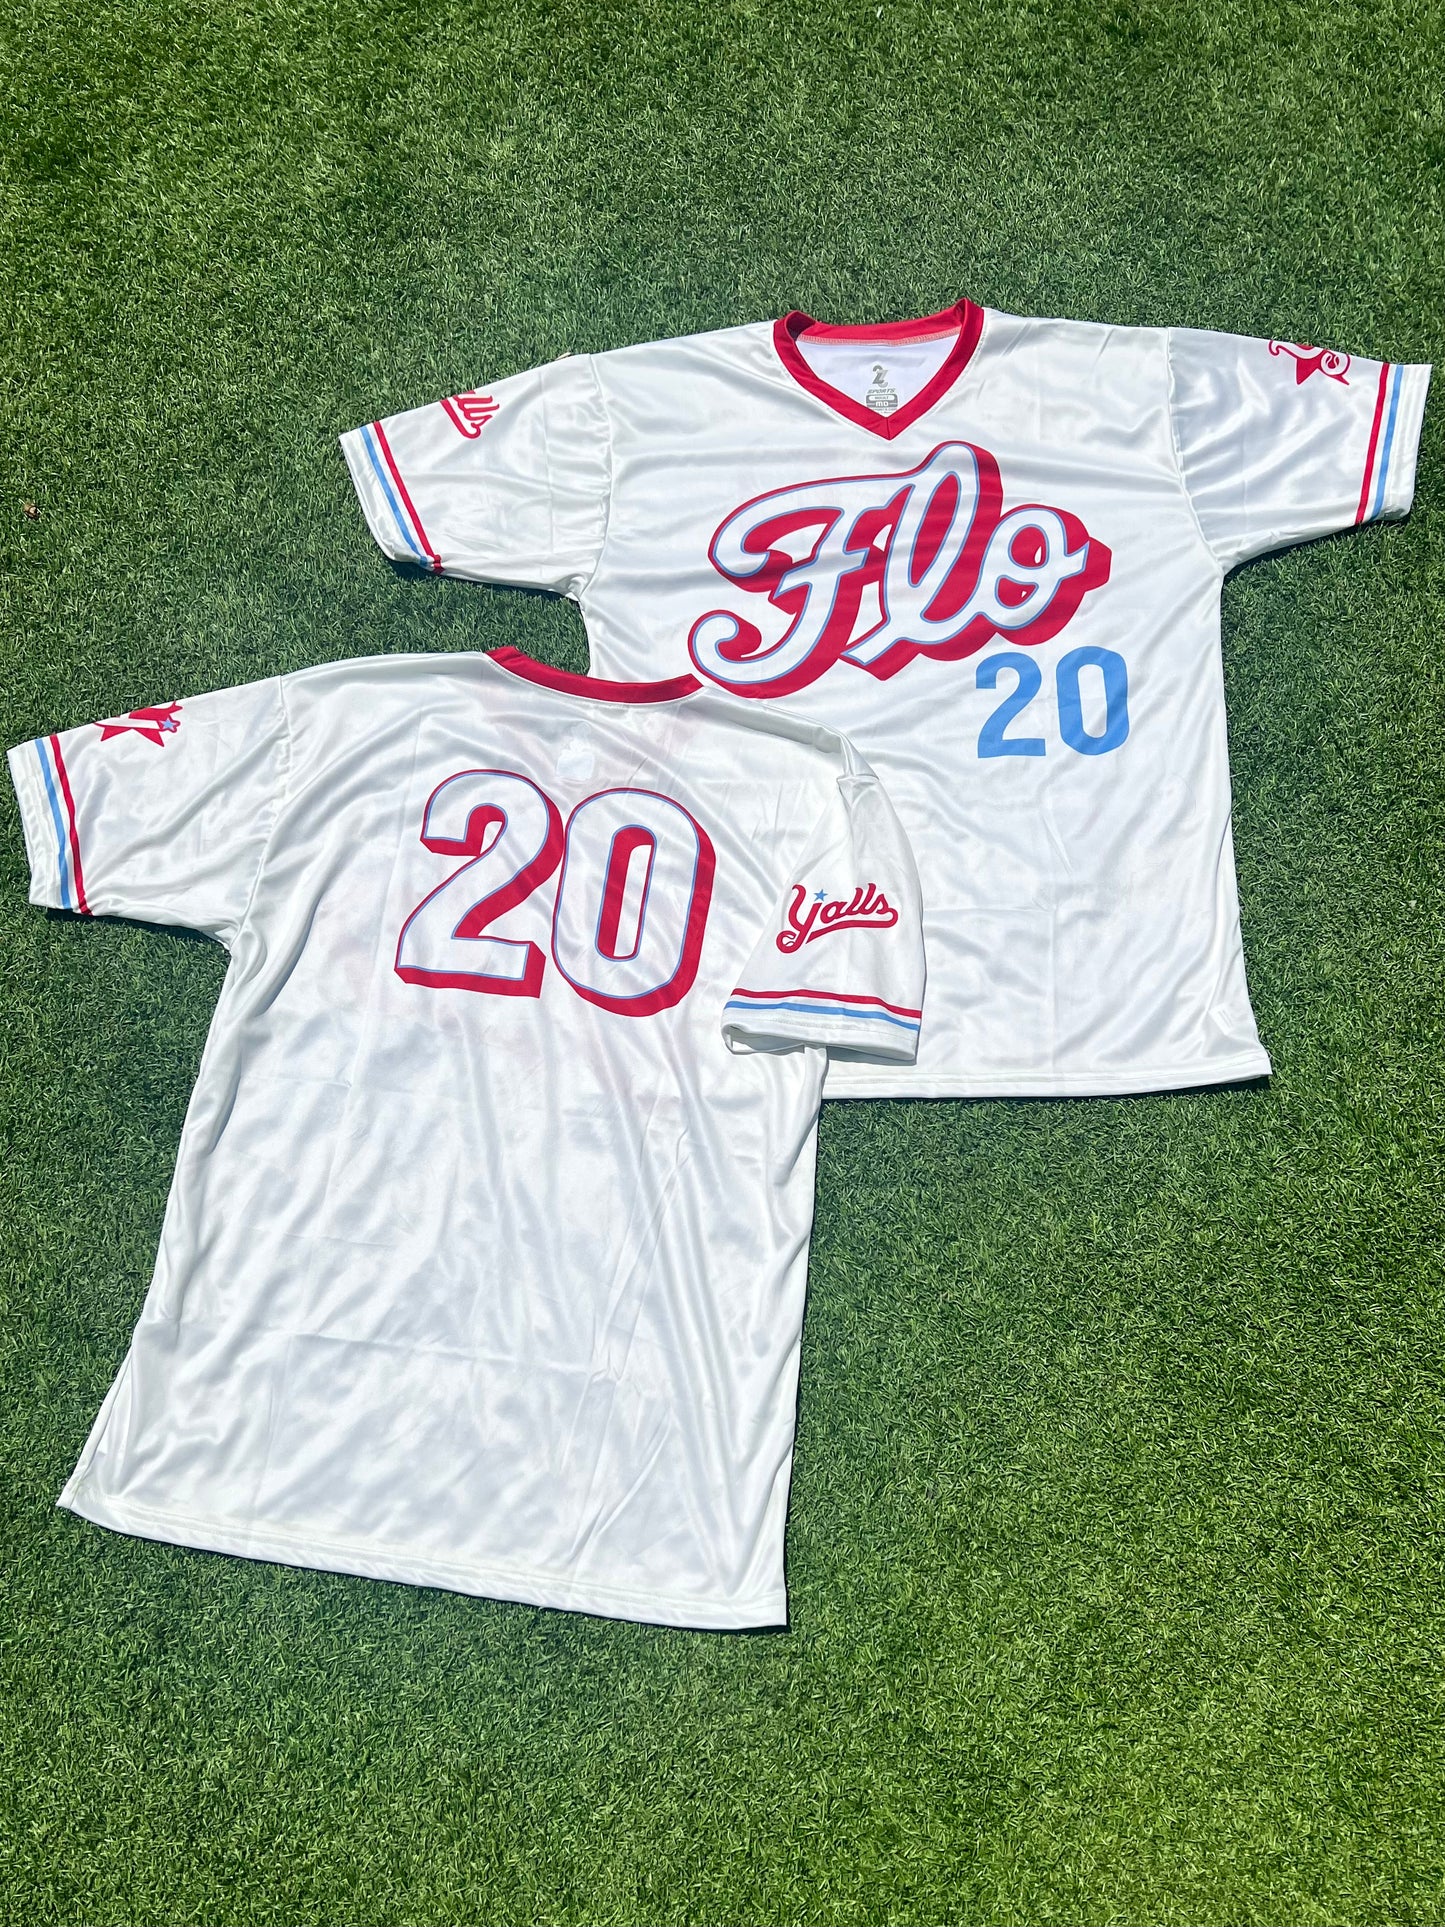 Youth Official Cream Replica Jersey